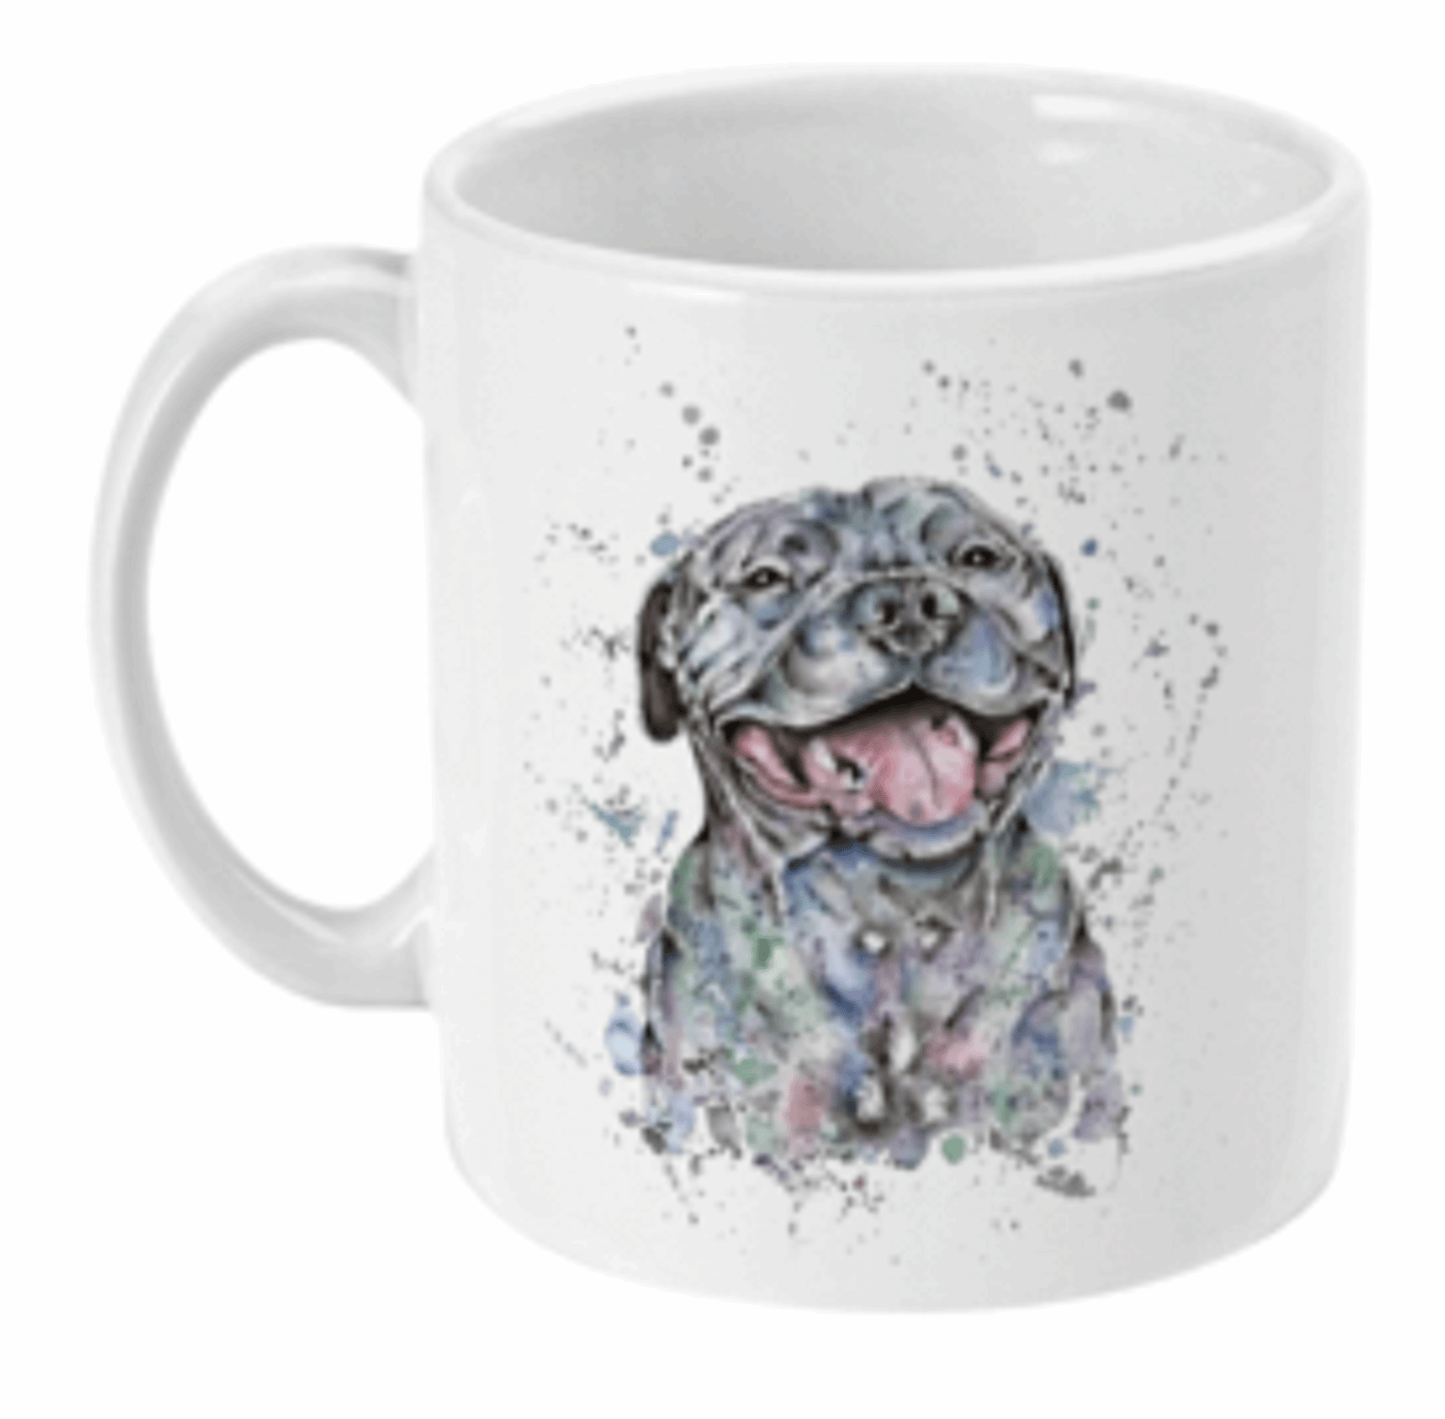  Water Colour Staffie Smile Dog Coffee Mug by Free Spirit Accessories sold by Free Spirit Accessories